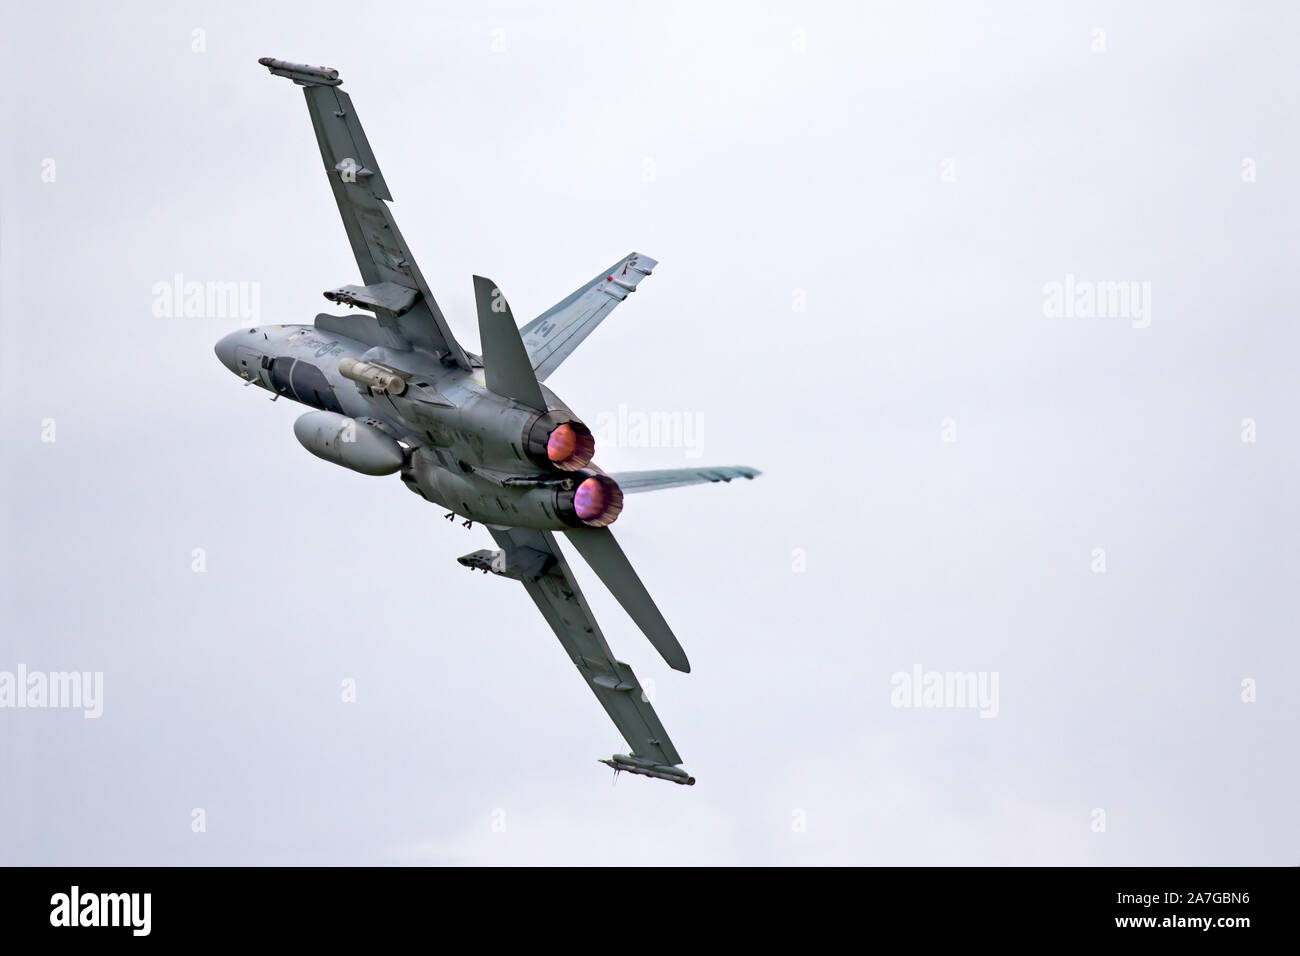 A McDonnell Douglas CF-18 Hornet, during a flyby, as it powers up and away from the spectators at Airshow London, in London, Ontario, Canada. Stock Photo